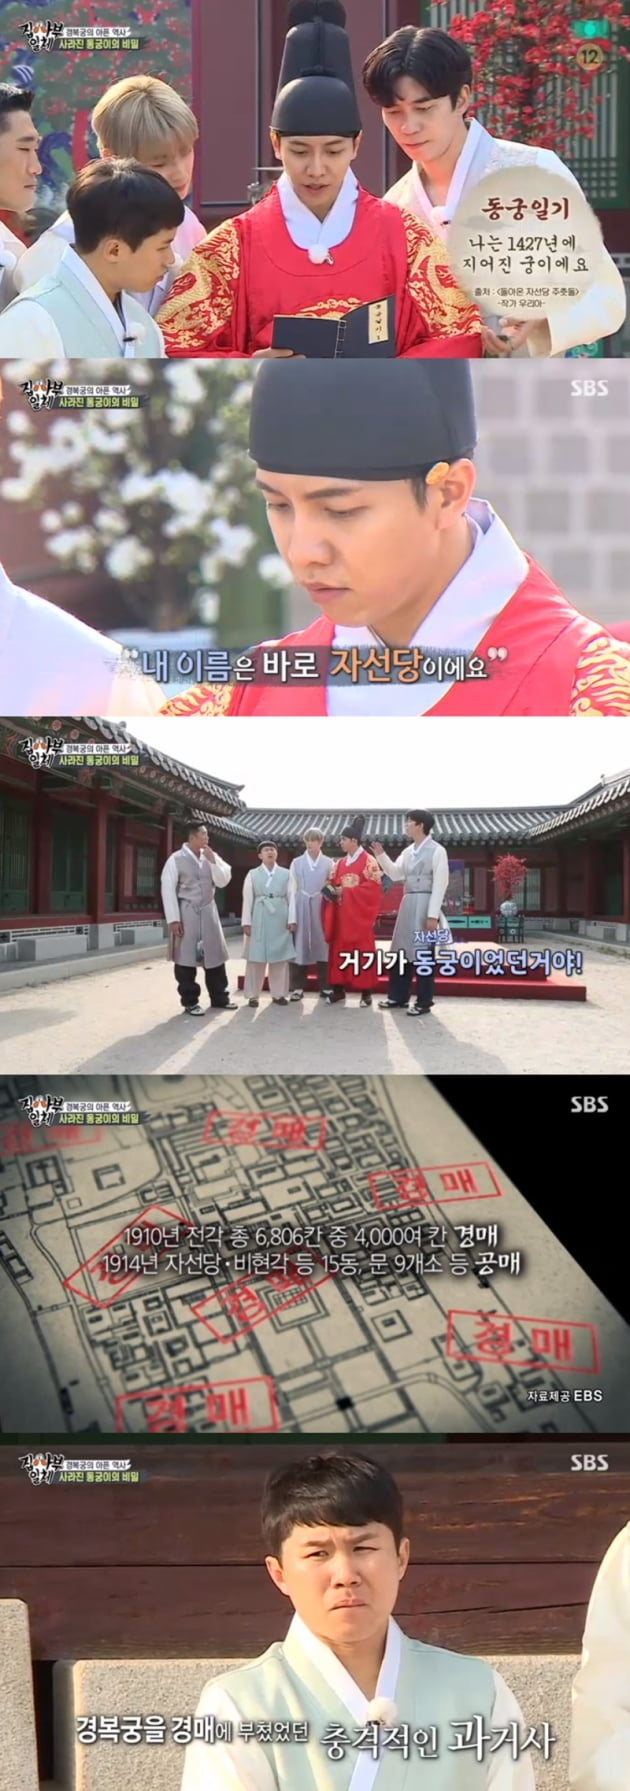 All The Butlers referred to Gyeongbokgung as the palace and history soon became a master and made a meaningful smile.On SBS All The Butlers broadcasted on the afternoon of the afternoon, Gyeongbokgung itself became a master and the members of All The Butlers were drawn to the Gyeongbokgung trip.Choi Tae-seong lecturer and actor Kim Kang Hoon appeared.Prior to the broadcast, the production team said in the caption, This video was filmed before the confirmed contact of Shin Sung-rok actor and informed us that we followed the Corona 19 anti-virus guidelines.I wish you a quick recovery from Shin Sung-rok actor. Shin Sung-rok was diagnosed with Corona 19 test negative, felt abnormality in his body during self-examination, was re-tested, and was diagnosed with Corona 19 and is being treated for self-examination.Cha Eun-woo shouted, Gyongbokgung, go back to Corona!The members of All The Butlers went to the site of history, the site where Empress Myeongseong was buried; Kim Kang Hoon said, I learned it as a textbook.I learned that it was only a death, but it is more terrible when I come and see it myself. Choi Tae-seong said, It is the first lighthouse in Korea in 1887. All The Butlers members laughed at CCTV.Kim Kang Hoon pointed out Lee Seung-gi to the question of picking up the crown to become king.Kim Kang Hoon said, I think the role of the king will fit well.On the contrary, Kim Dong-Hyun was pointed out to the person who matches the least identity and caught the eye.The Winning, King of Man contest began with Lee Seung-gi as the center.Lee Seung-gi said, Who ate meat? When he was angry, Yang said, I saw the person who ate it. Kim Dong-Hyun said he ate it.But Lee Seung-gi went on to punish him, saying, You ate it!While dancing to the Korean traditional music, many people suddenly ran and shouted, Goodbye My Princess is gone!Goodbye My Princess Kim Kang Hoon was a charity party that they had gone to earlier.I walked the heart of Gyeongbokgung, the sun in the temple, he said in the left Goodbye My Princess diary. In the end, I was sold to Japan.And I lost my mind. Cho Seon-eun, and what happens to me? Goodbye My Princess Diary guessed that there was only a place that was not a building.Choi Tae-seong said, There is pain here. He mentioned the burning marks and said, Empress Myeongseong is also the place where it was buried.If we didnt know these stories, we would have passed even if we came here, Shin Sung-rok noted.Knowing history right away is what we have to pass on to not only us but our future generations, Choi Tae-seong said.a fairy tale that children and adults hear togetherstar behind photoℑat the same time as the latest issue